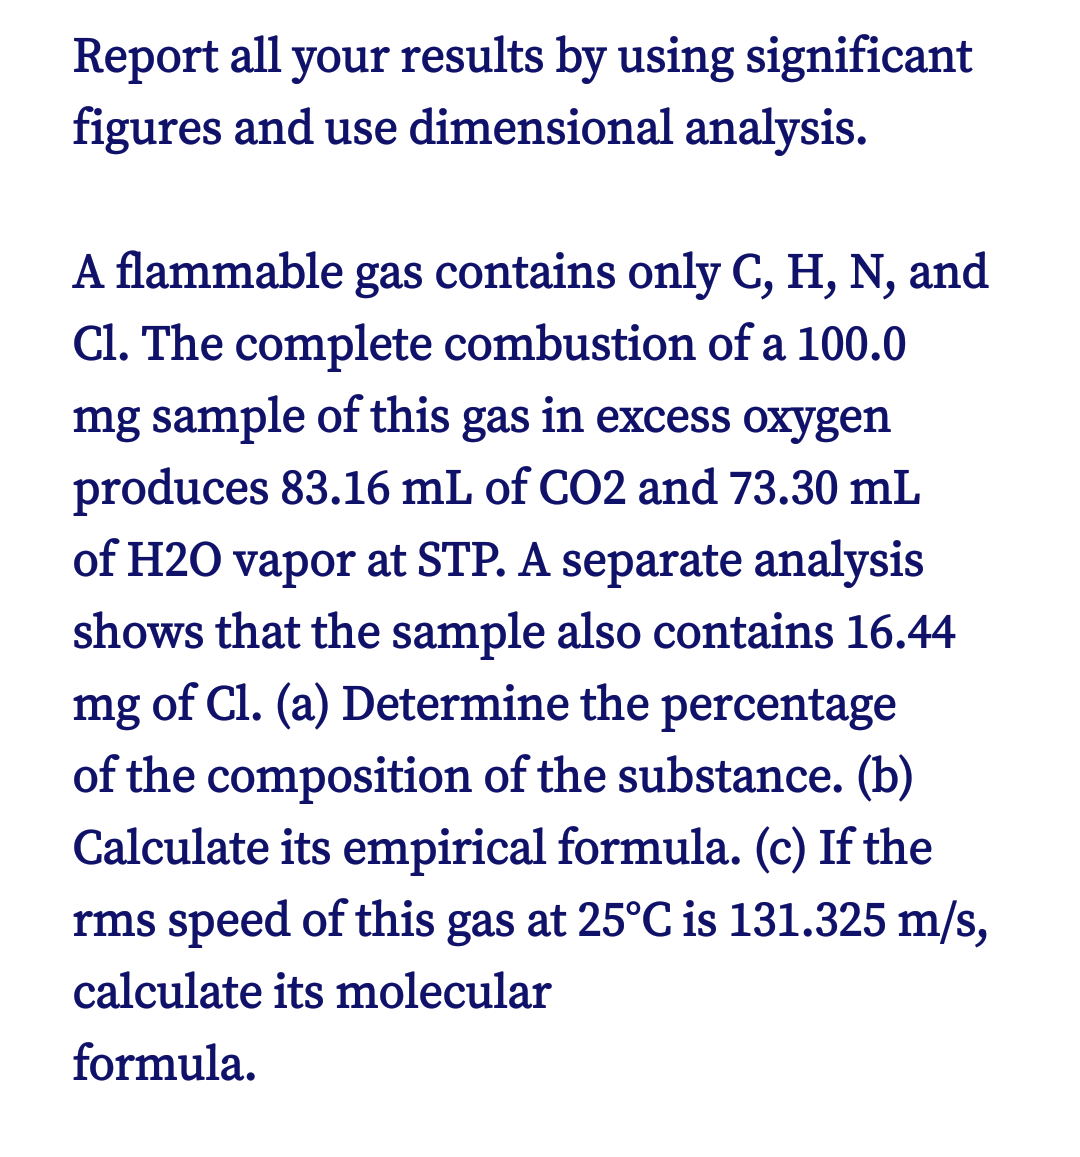 Report all your results by using significant
figures and use dimensional analysis.
A flammable gas contains only C, H, N, and
Cl. The complete combustion of a 100.0
mg sample of this gas in excess oxygen
produces 83.16 mL of CO2 and 73.30 mL
of H20 vapor at STP. A separate analysis
shows that the sample also contains 16.44
mg of Cl. (a) Determine the percentage
of the composition of the substance. (b)
Calculate its empirical formula. (c) If the
rms speed of this gas at 25°C is 131.325 m/s,
calculate its molecular
formula.
